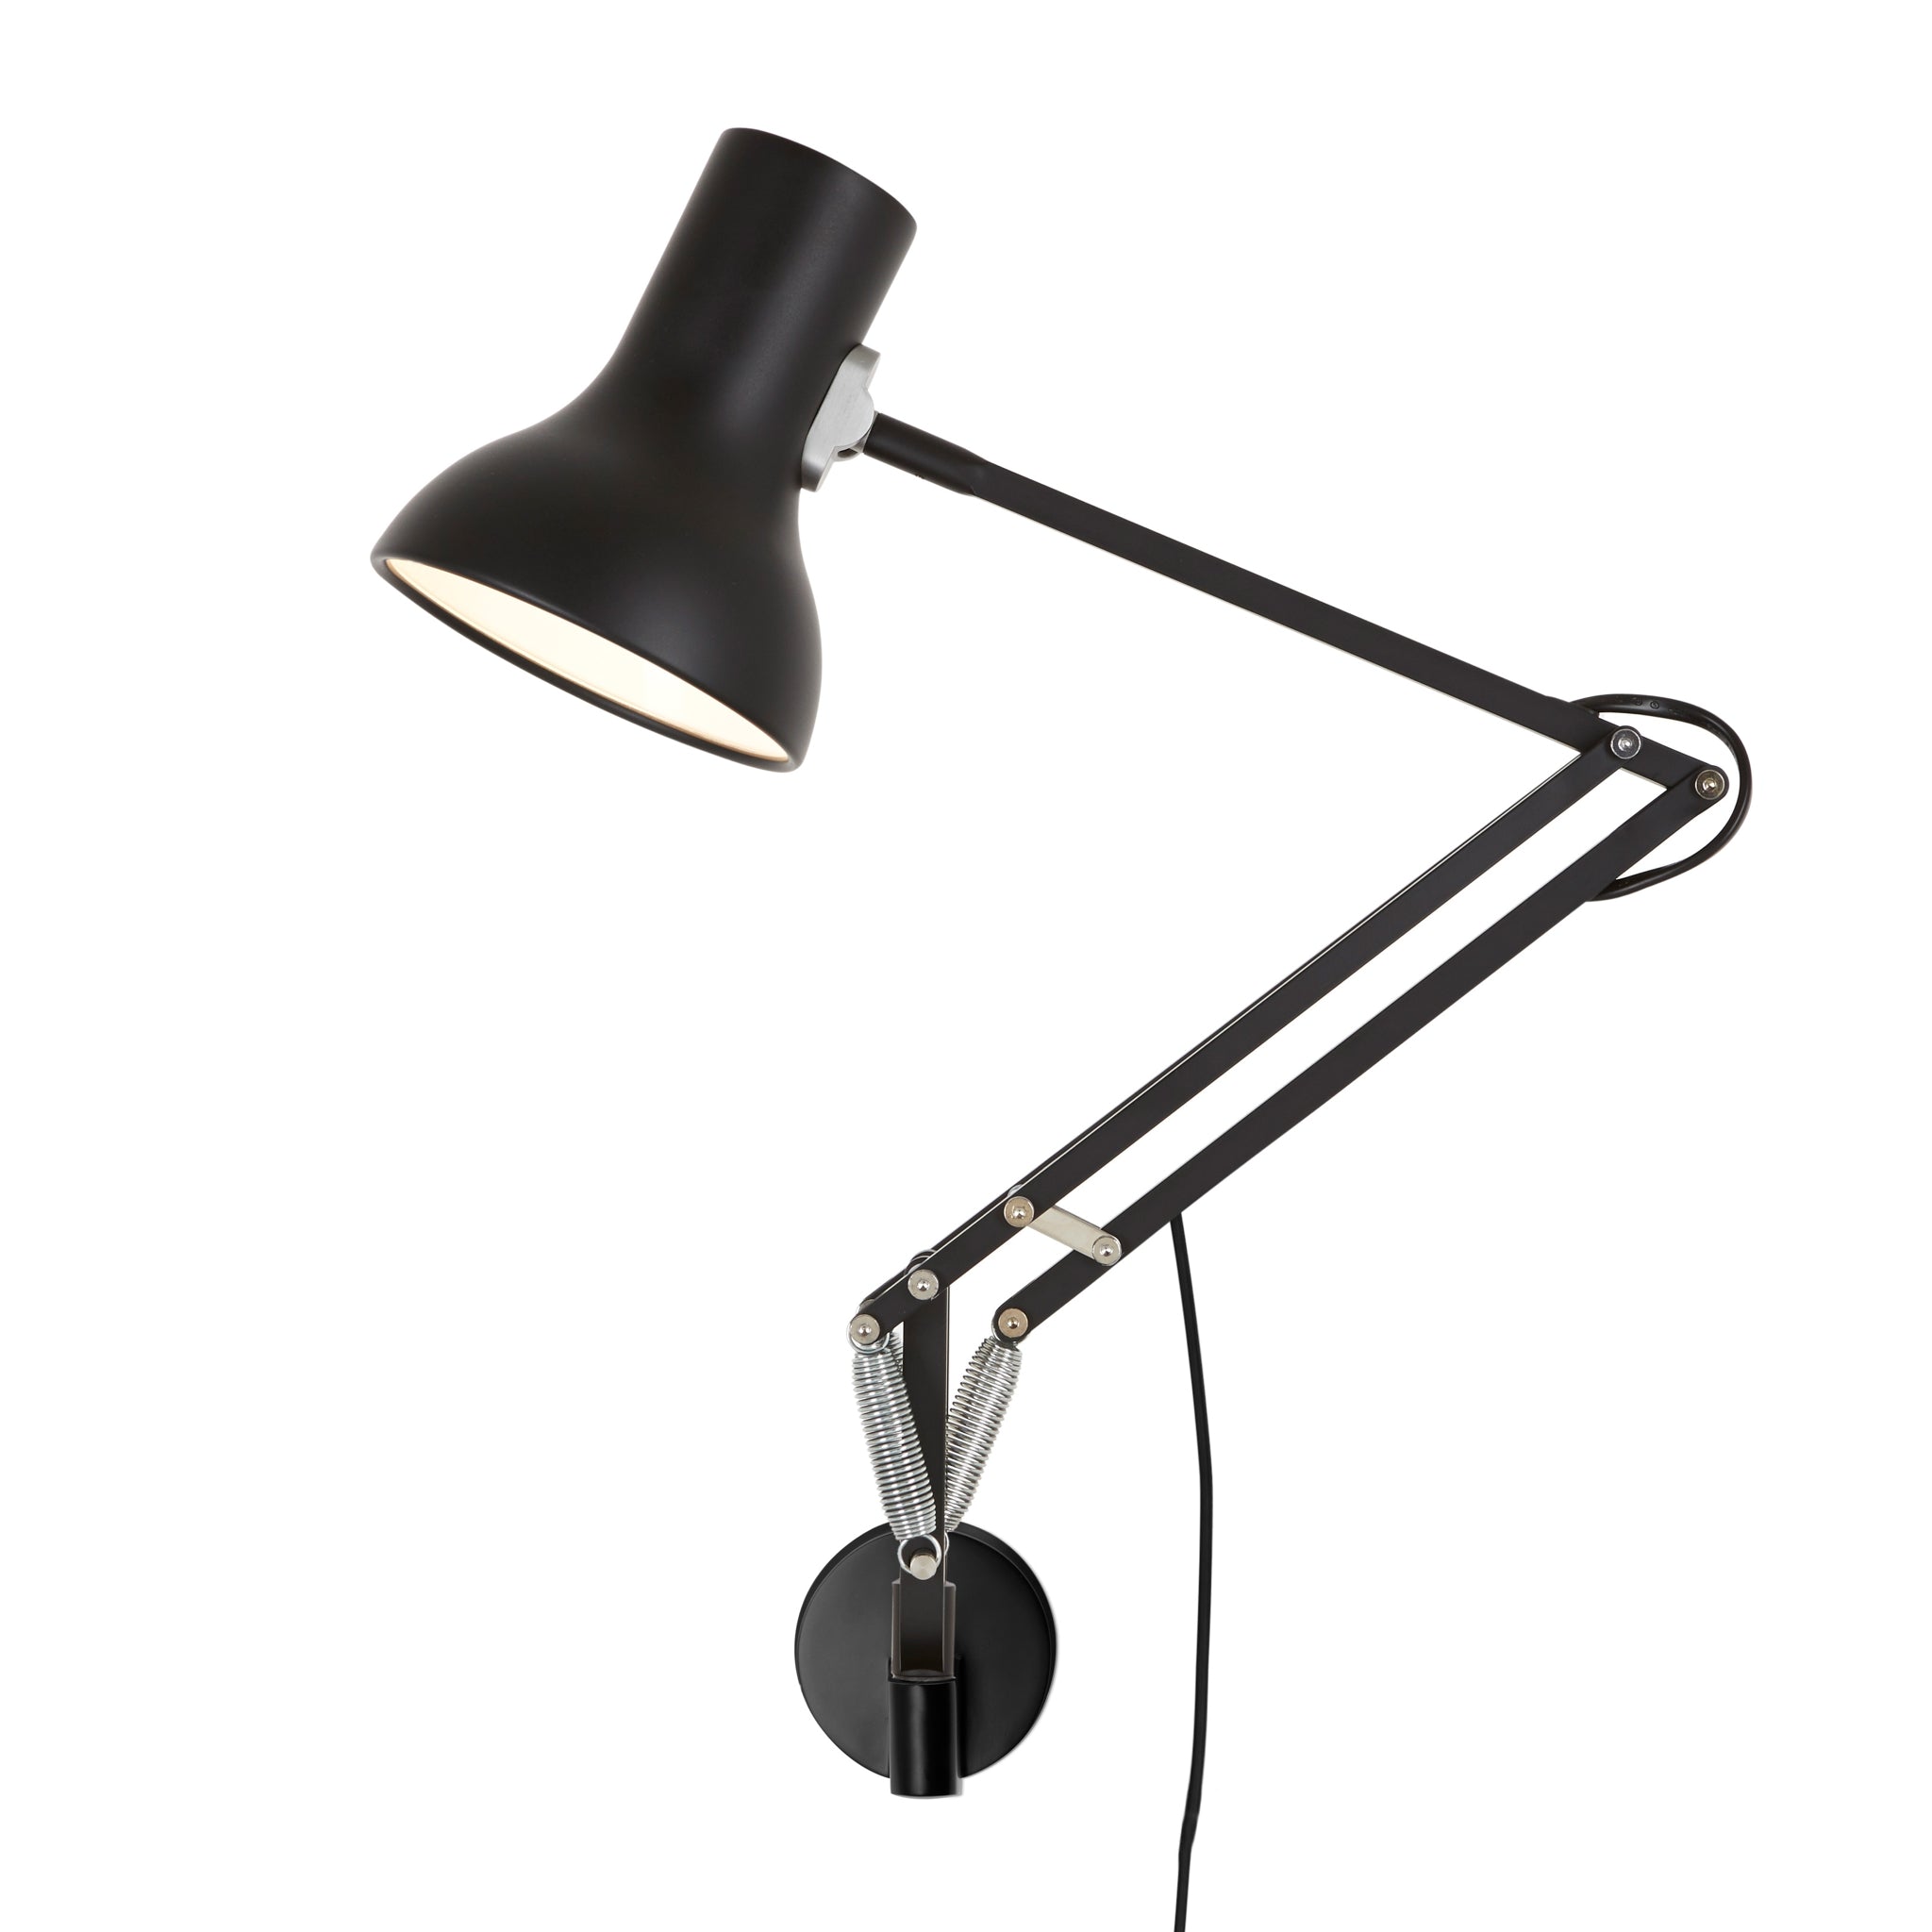 Type 75 Mini Wall Mounted Lamp by Anglepoise